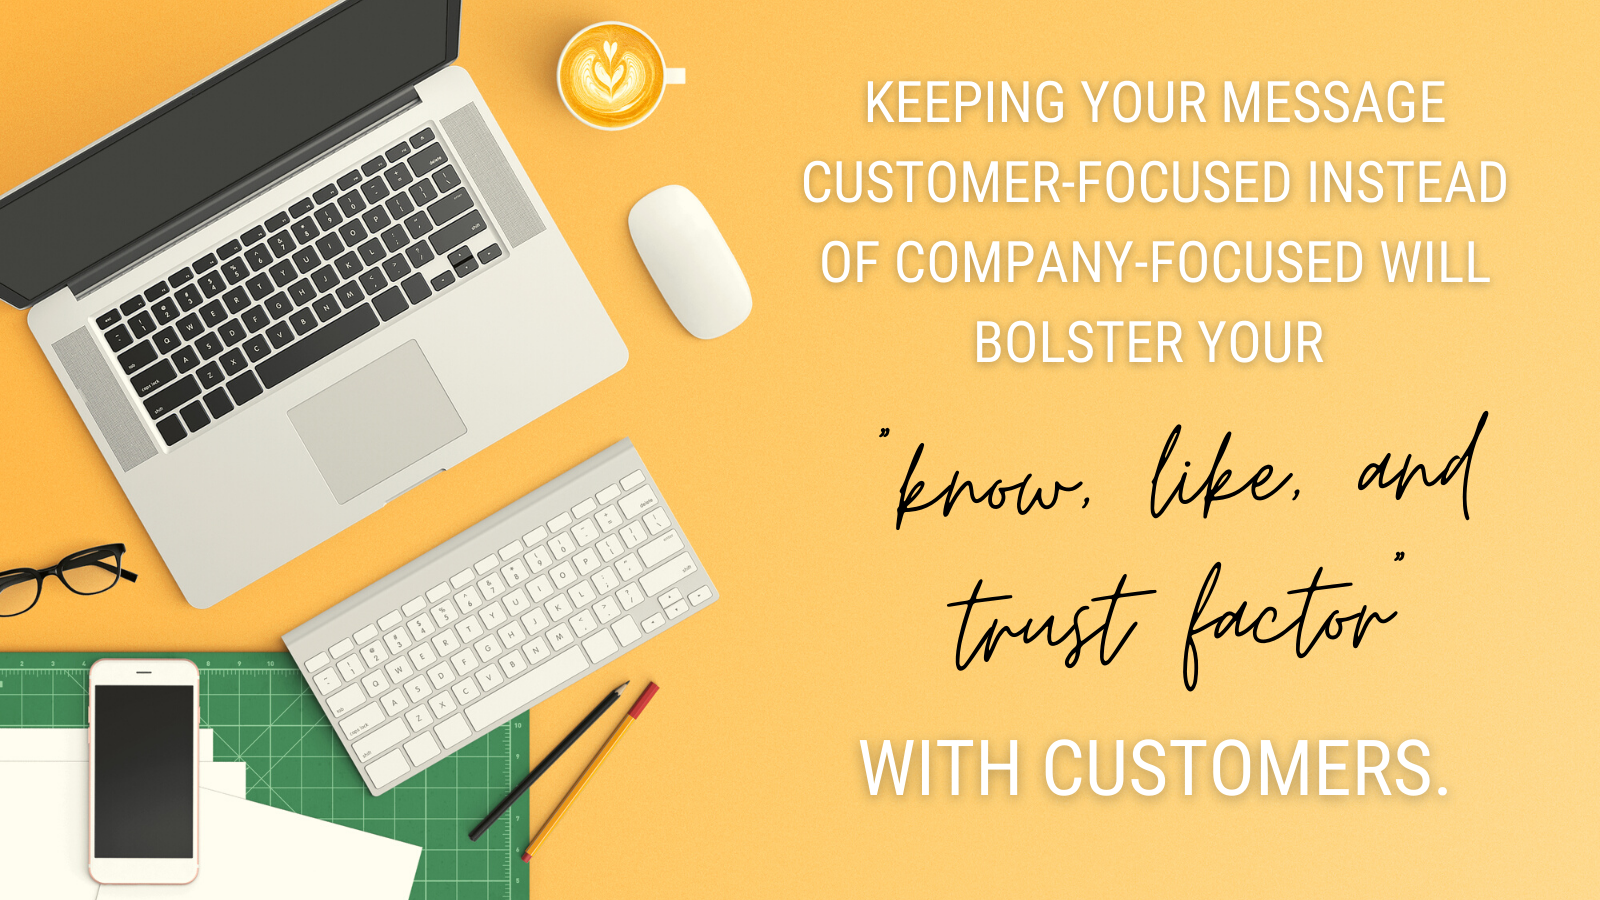 keeping your message customer-focused company-focused know like trust atomic revenue cutomer marketing